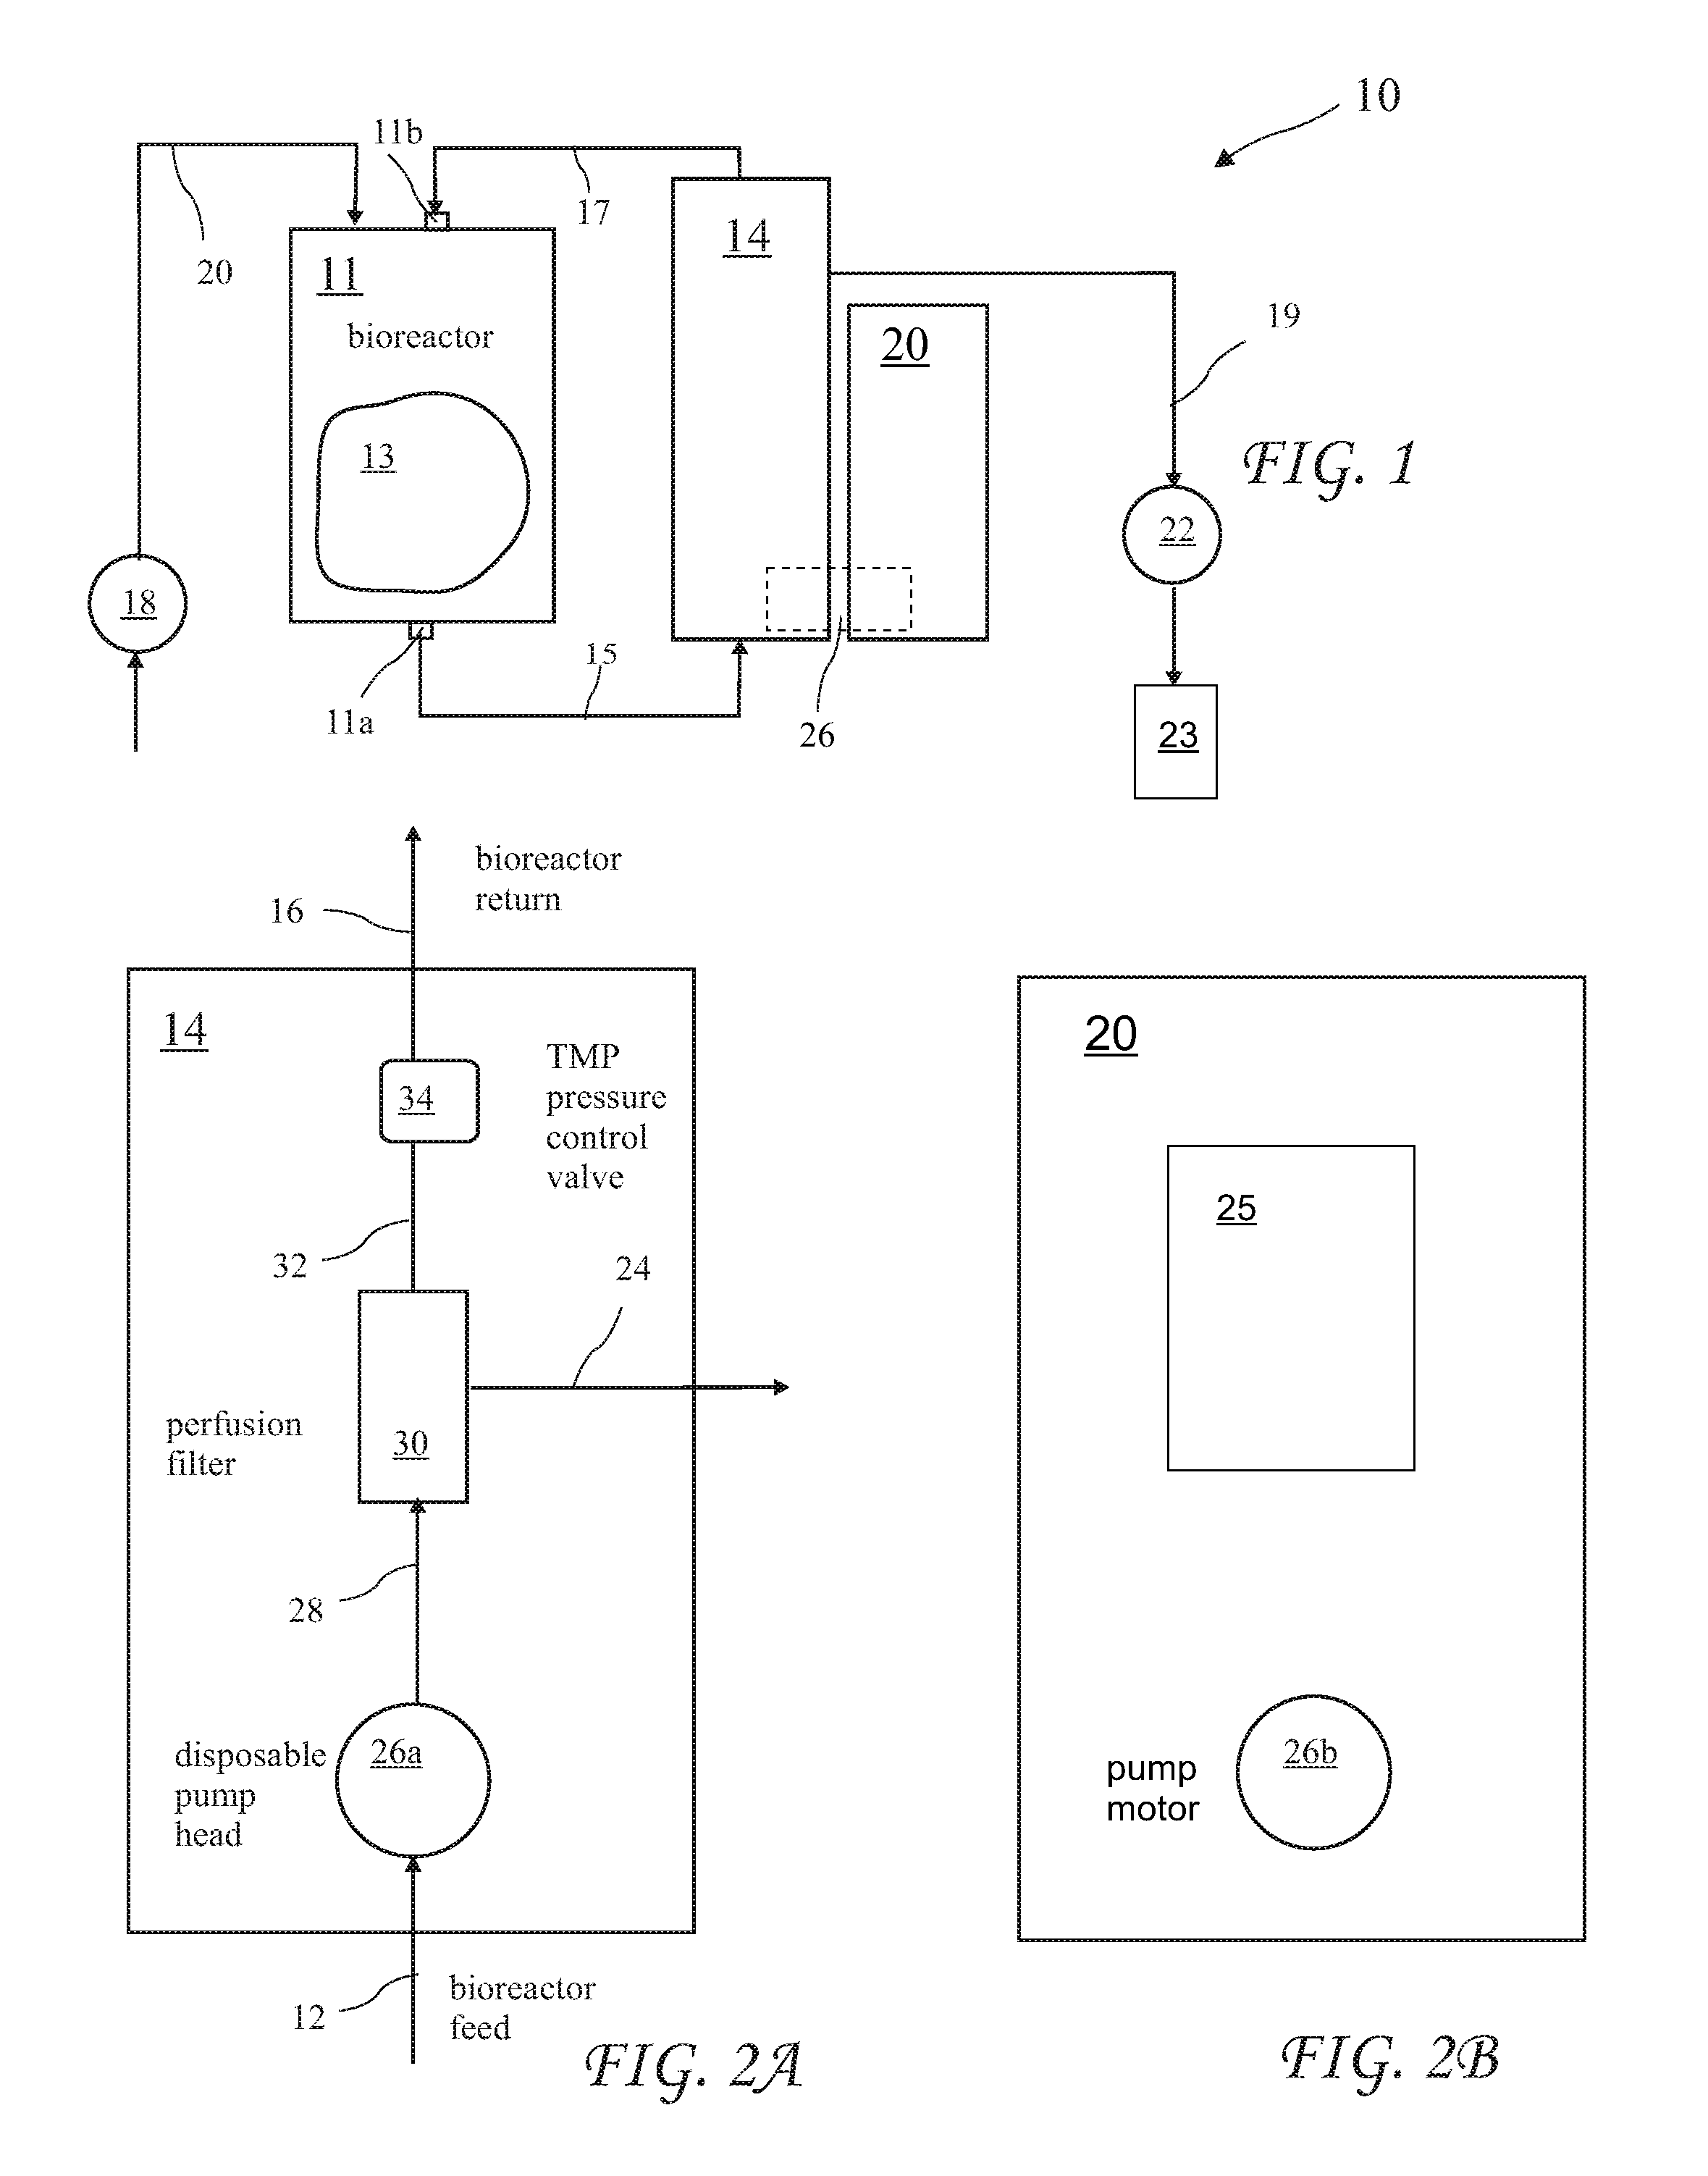 Method for Proliferation of Cells Within a Bioreactor Using a Disposable Pumphead and Filter Assembly